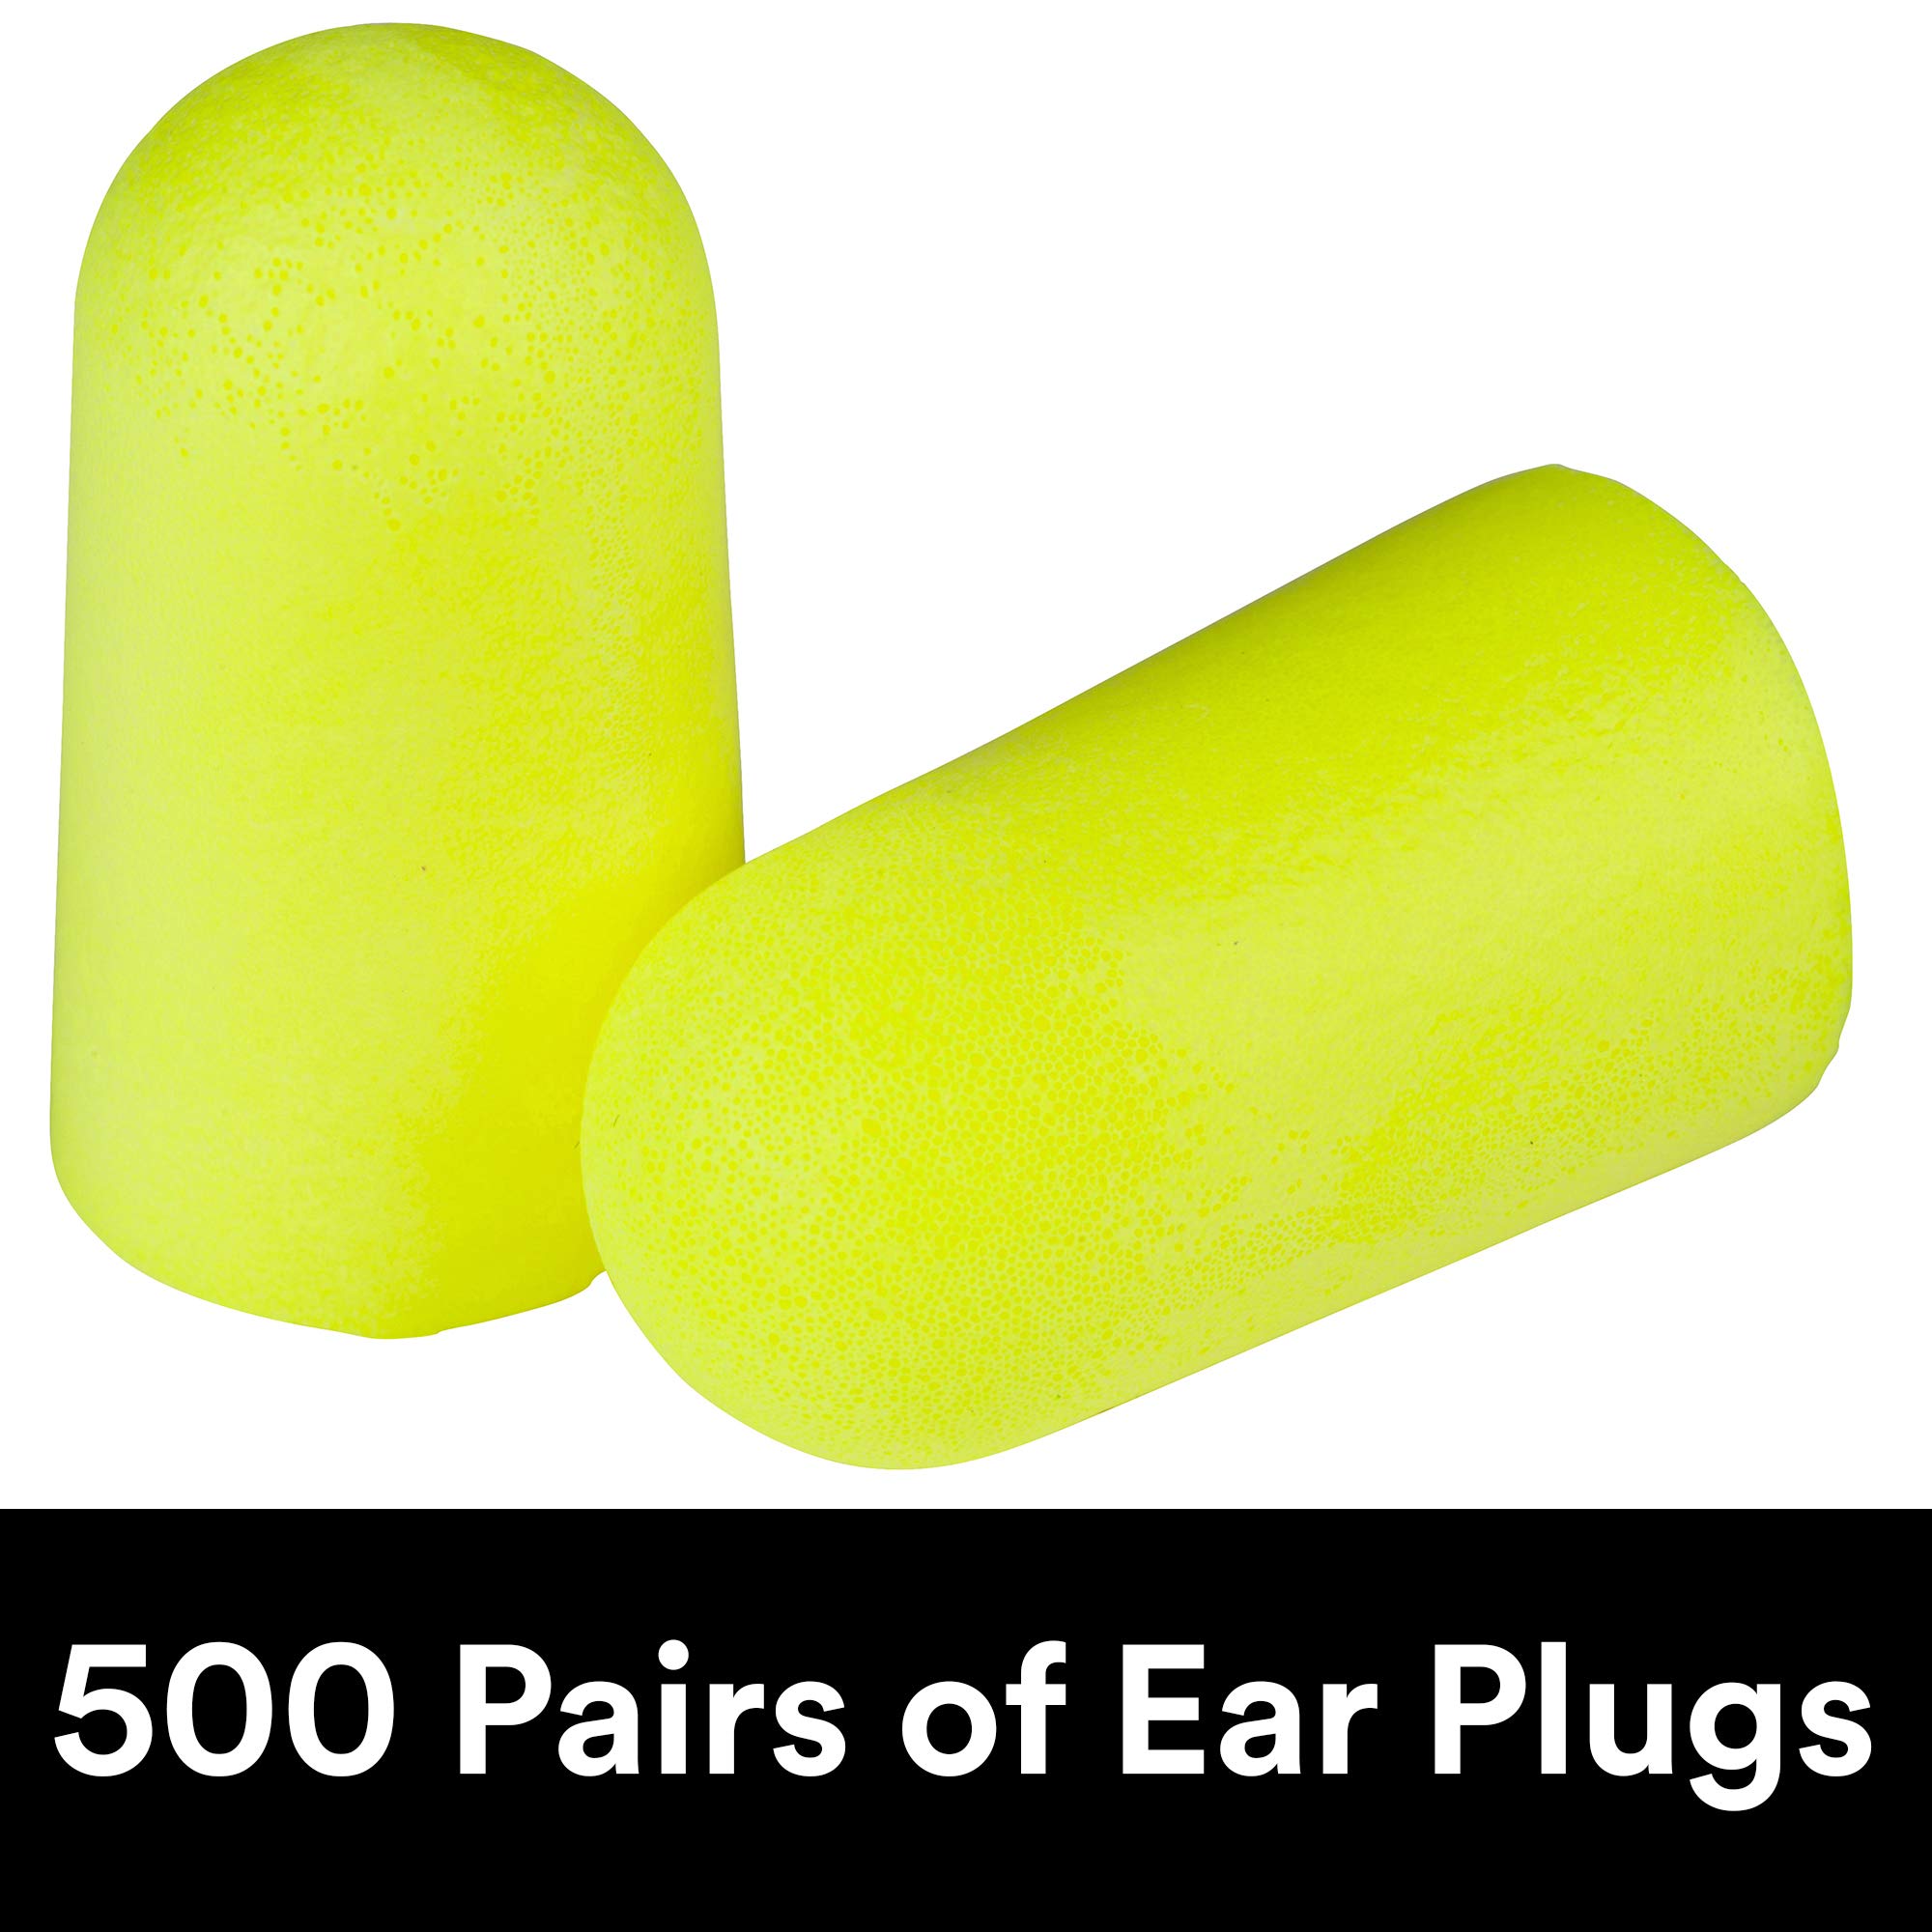 3M Ear Plugs, 500 Pairs/Refill Bottle for Touch Dispenser, E-A-Rsoft Yellow Neons 391-1004, Disposable, Foam, NRR 33, Drilling, Grinding, Machining, Sawing, Sanding, Welding, Yellow, Regular/1